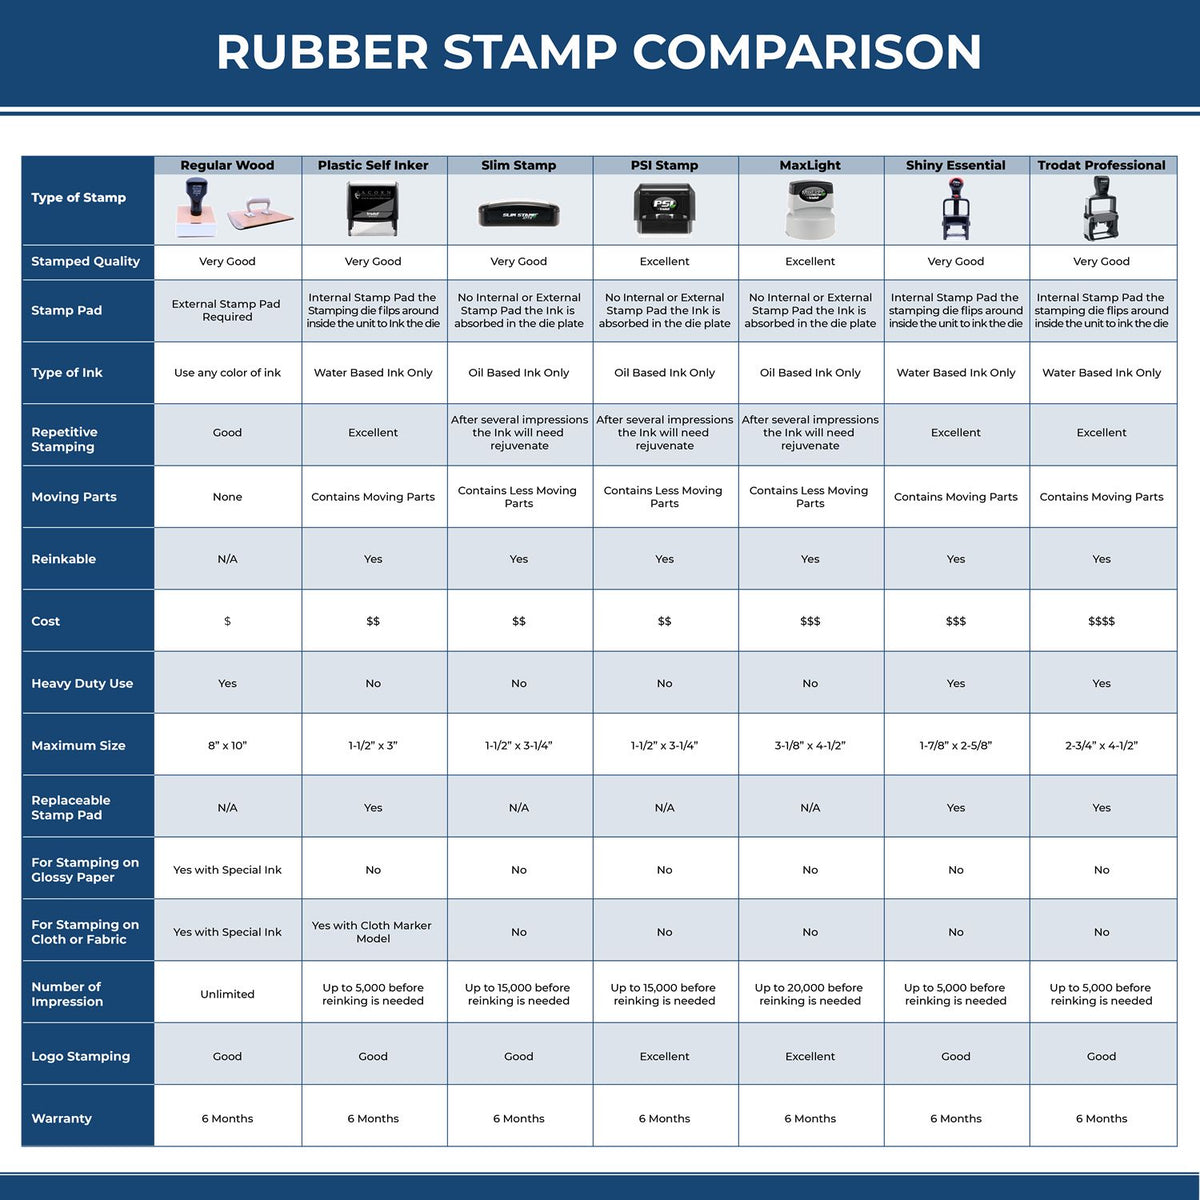 Large Official Rubber Stamp 4944R Rubber Stamp Comparison